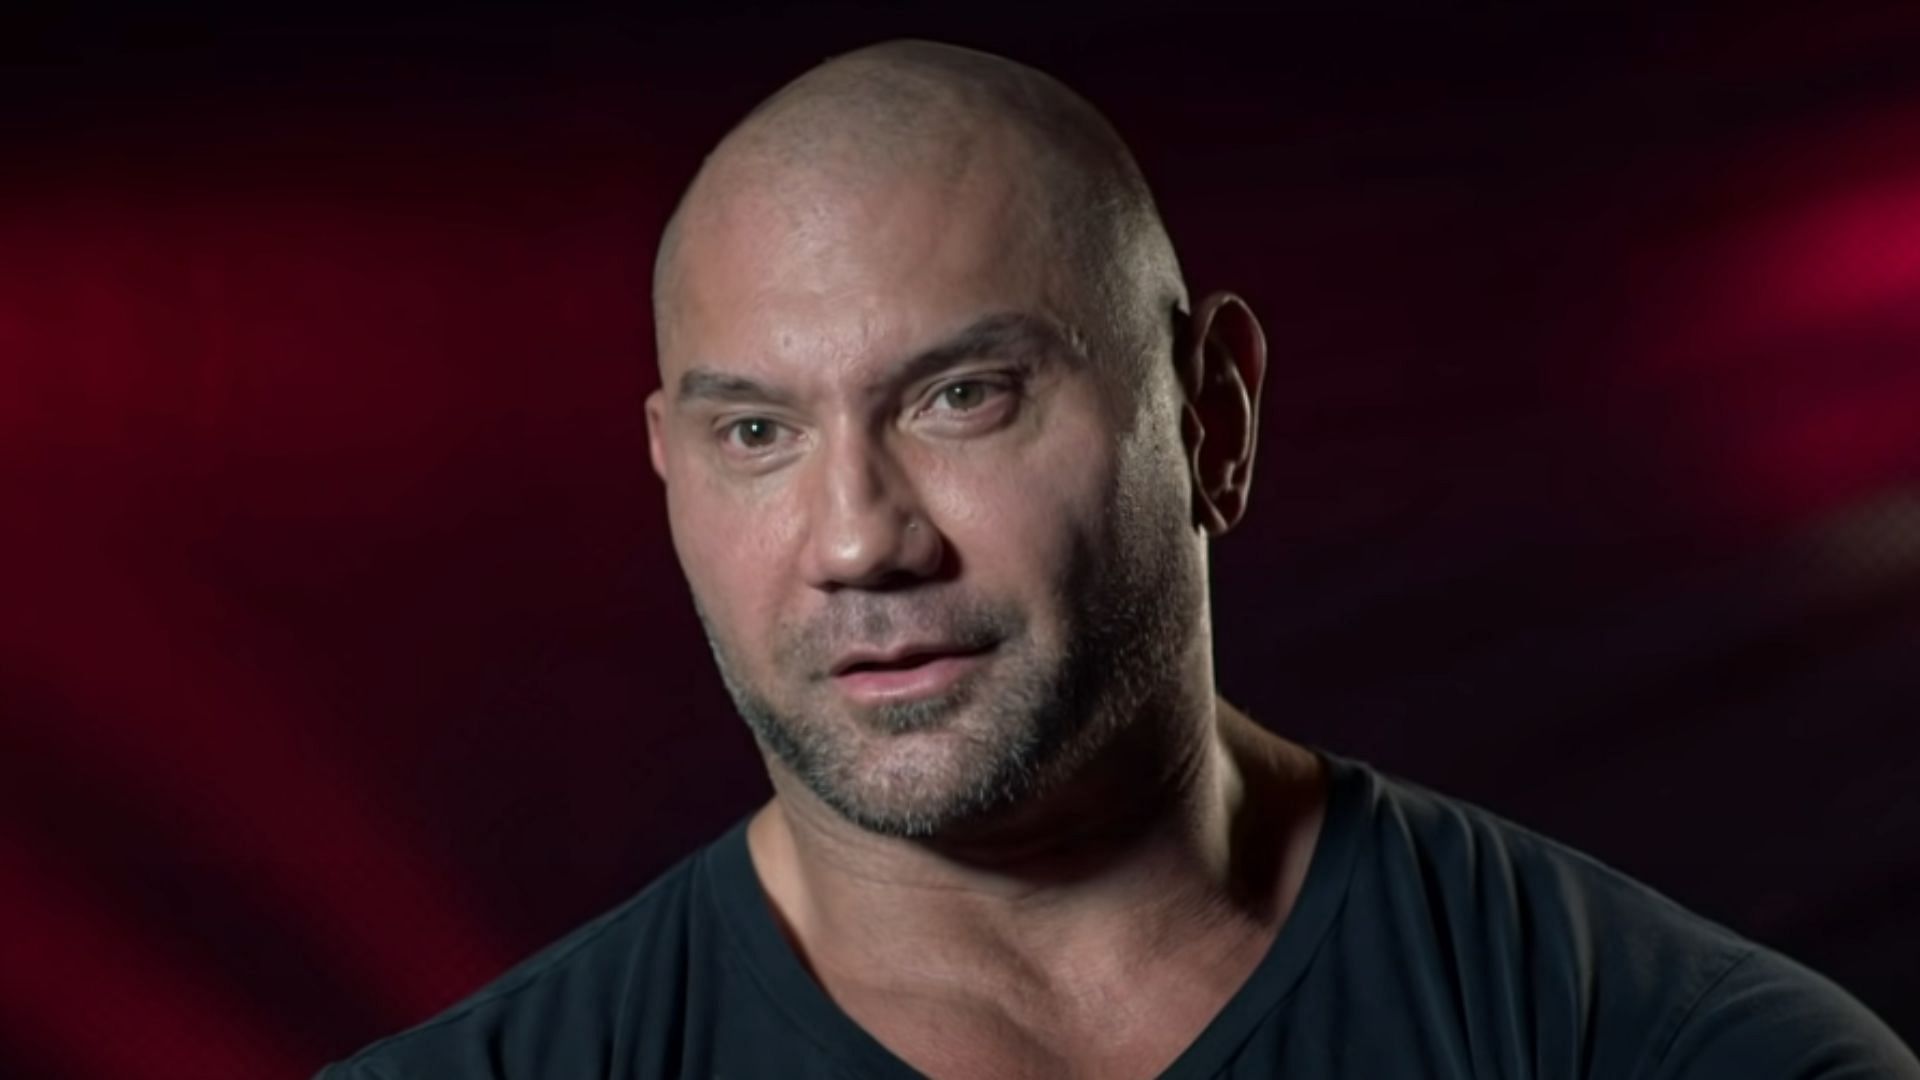 Batista was one of the top WWE stars of his generation.